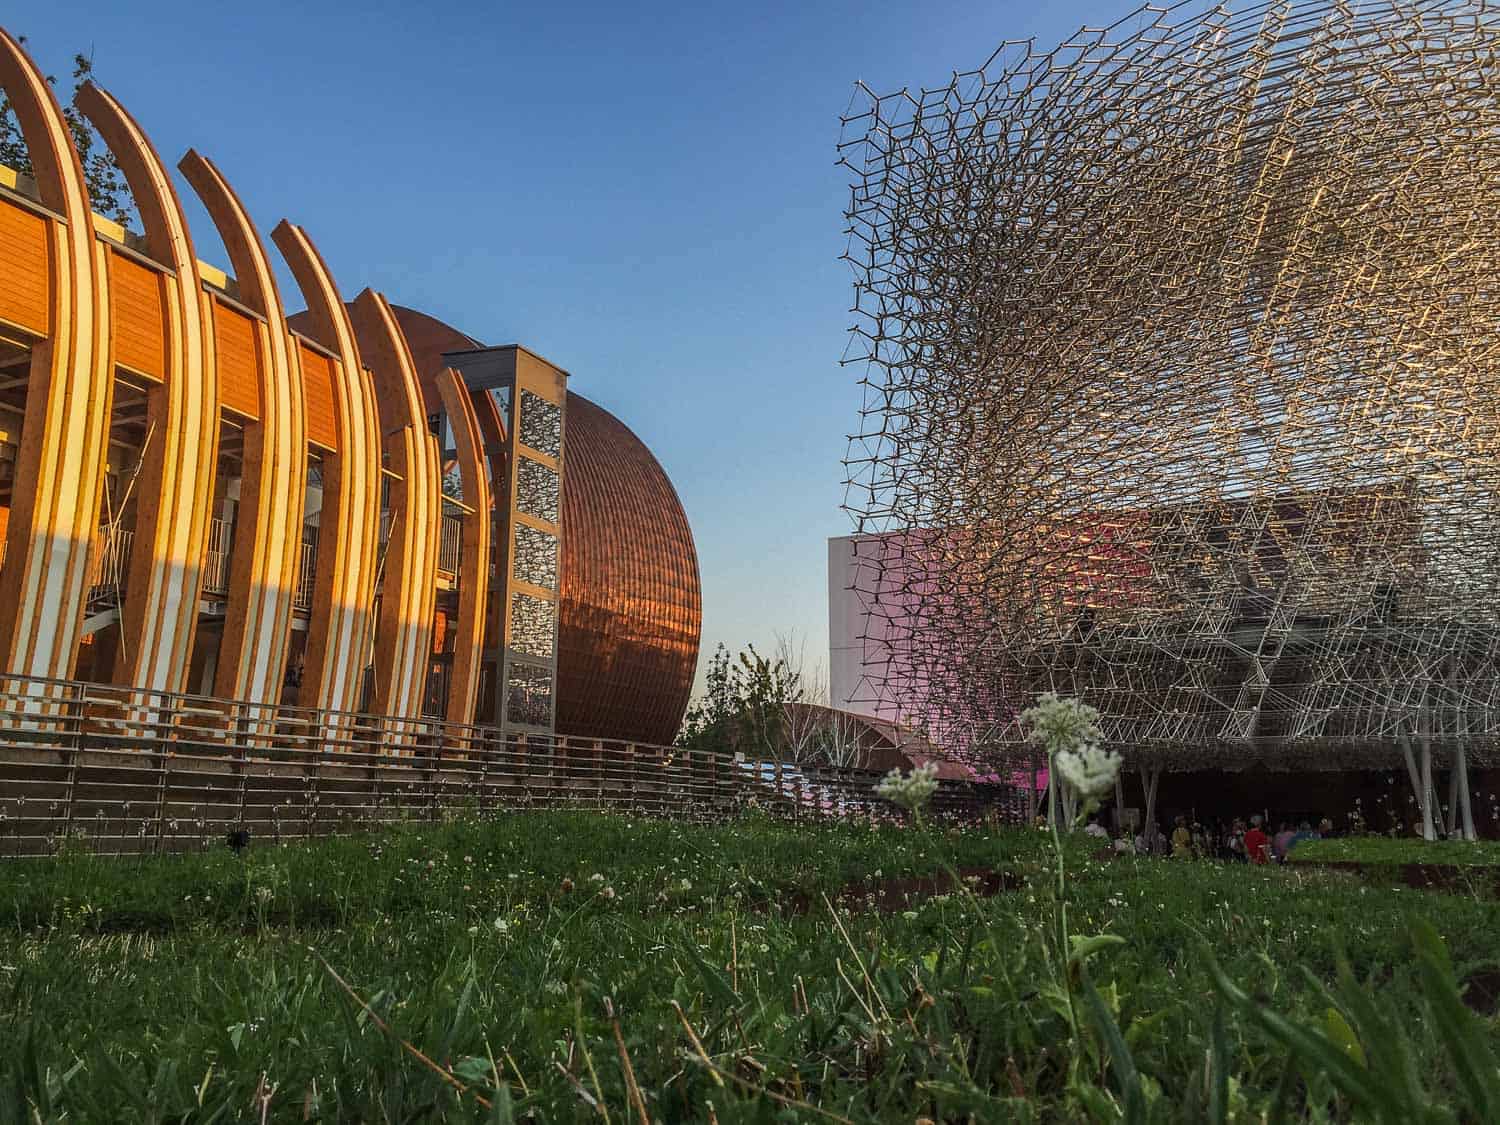 The UK Pavilion at the Milan Expo